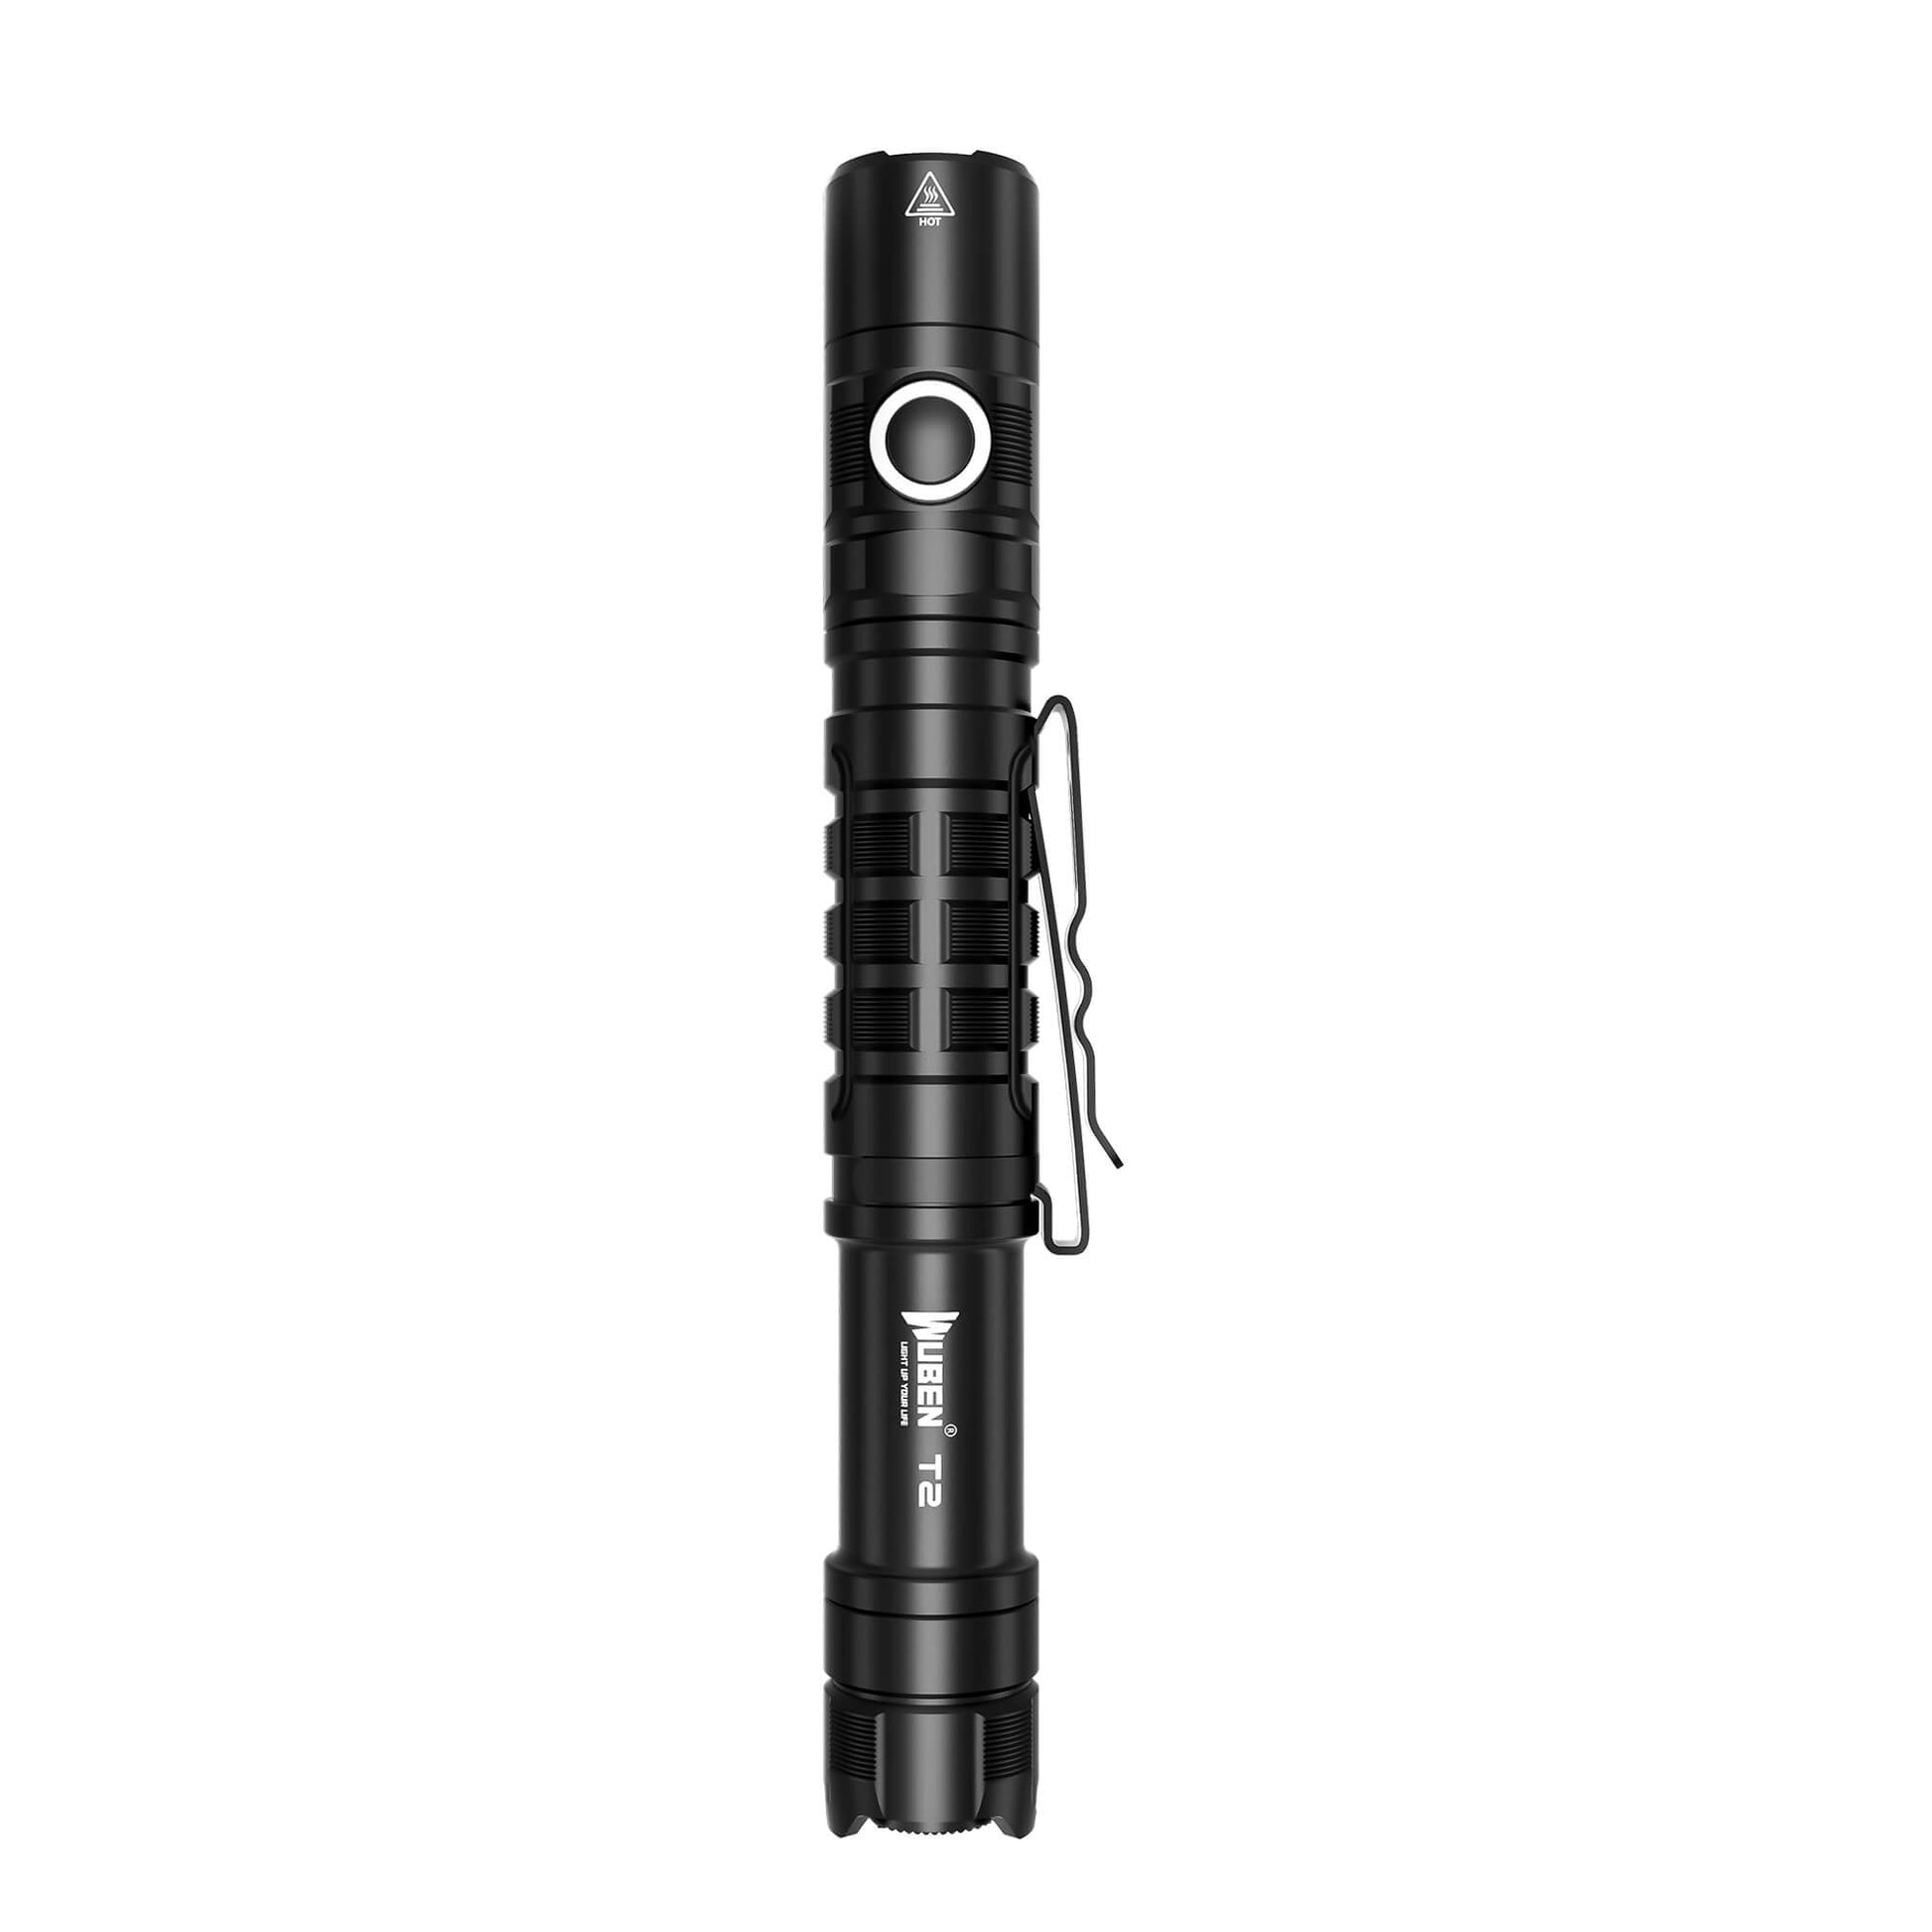 WUBEN T2 LED Tactical Flashlight Momentary-on Tail Switch High 550 Lumens AA Battery IP68 Tactical Flashlights For Self-defense Emergency Outdoor - WUBEN